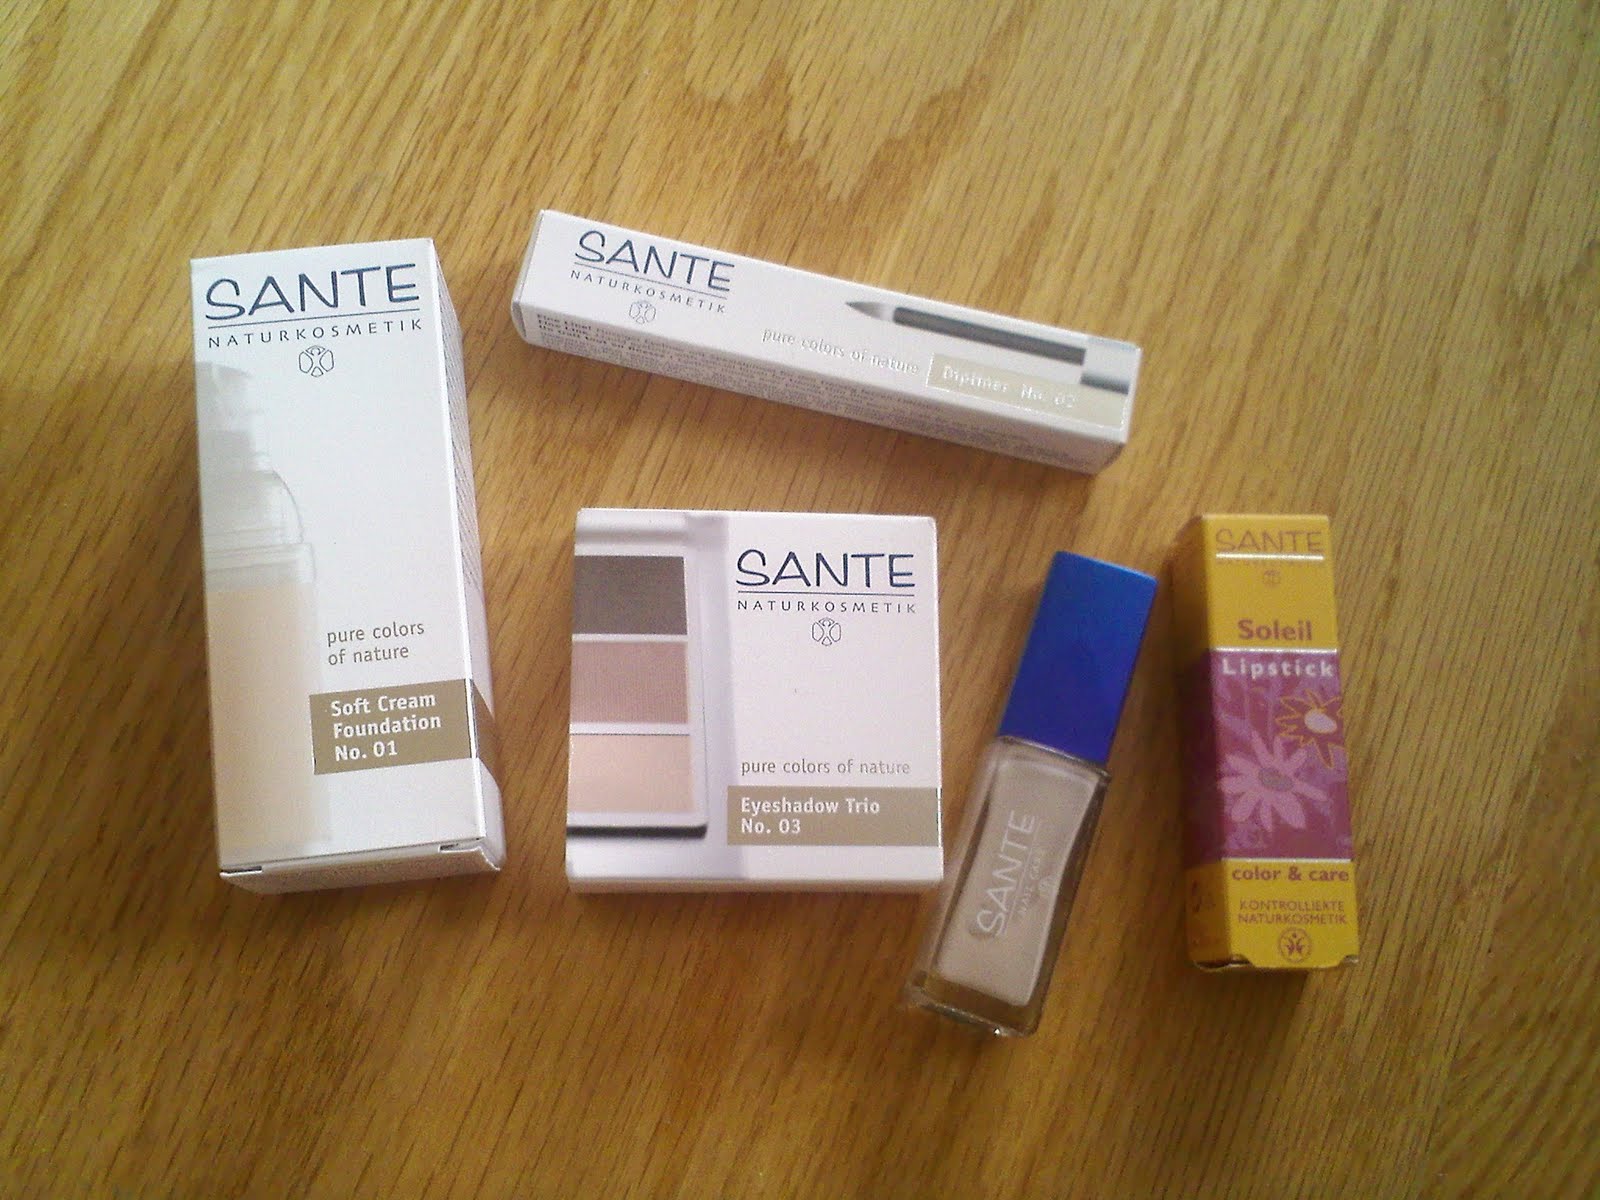 & All come to Cosmetics Beauty America! SANTE That: